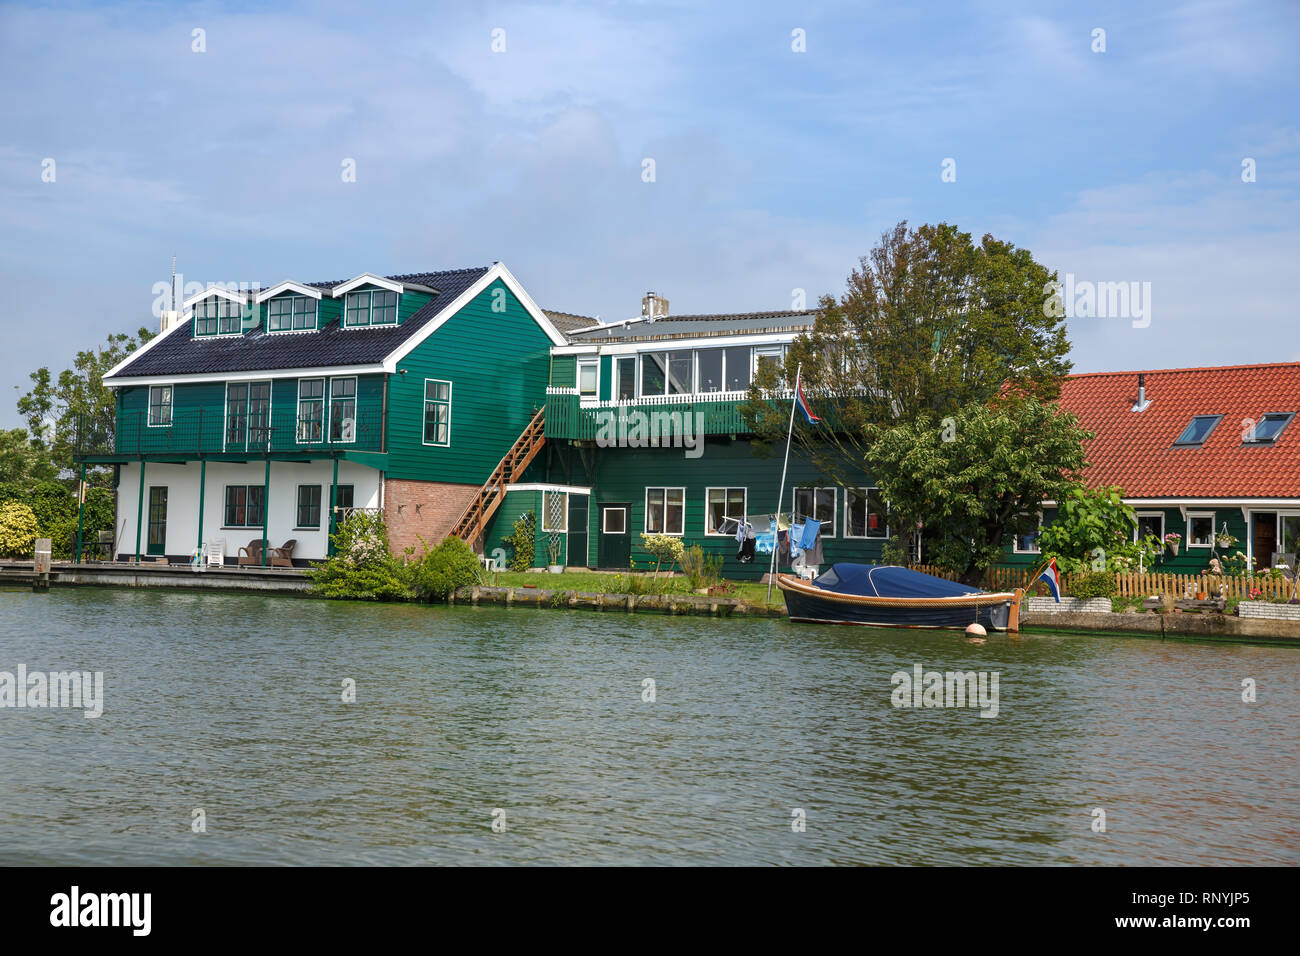 Zaanse Schans village with river and houses in The Netherlands. Stock Photo